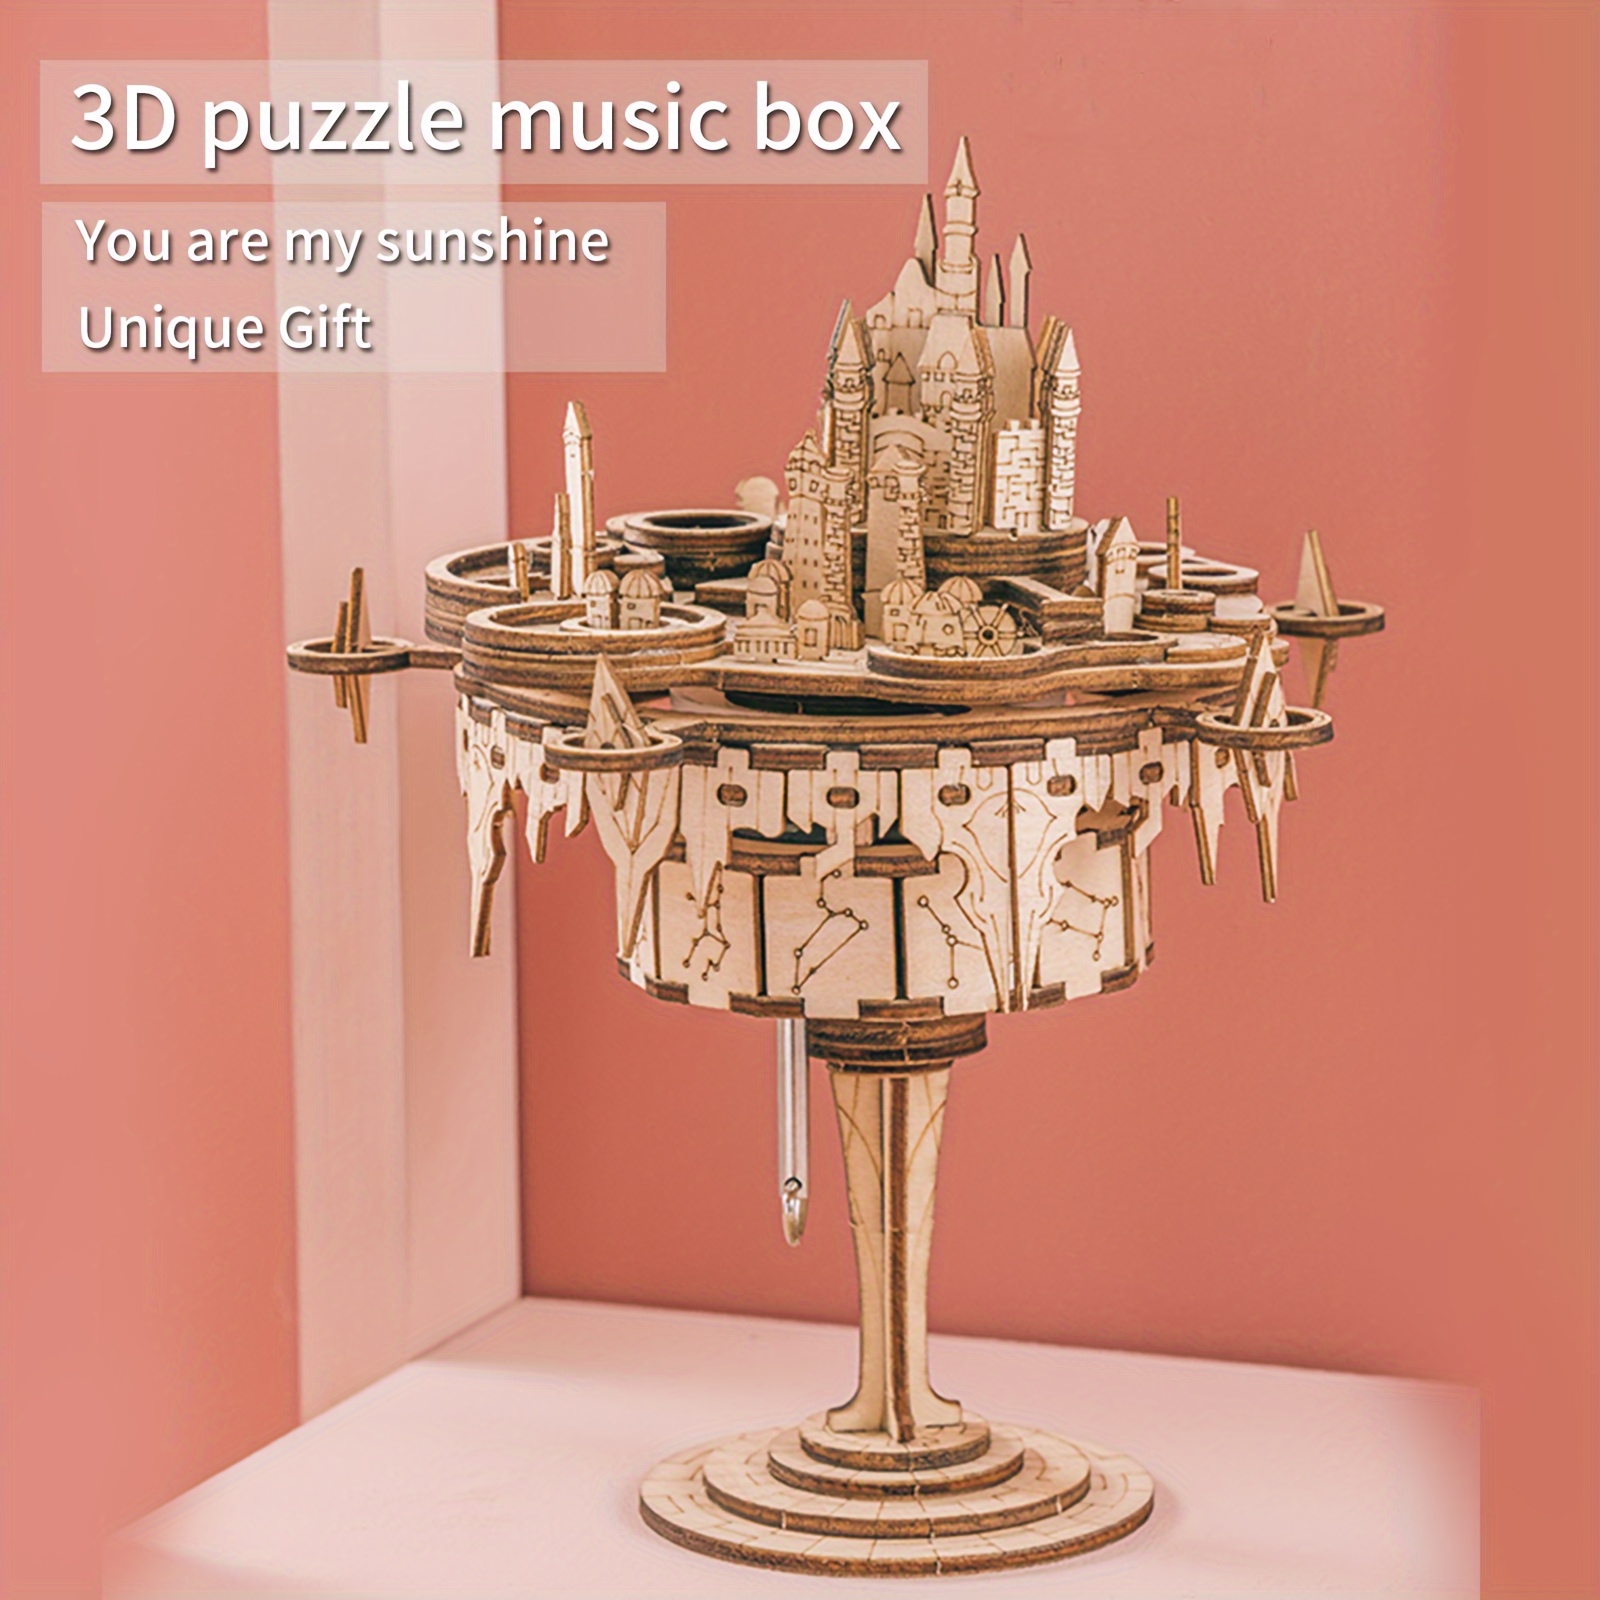 

3d Wooden Puzzles Music Box Kits You Are My Sunshine Castle Building Model Diy Crafts Birthday Gift For Girls Or Women